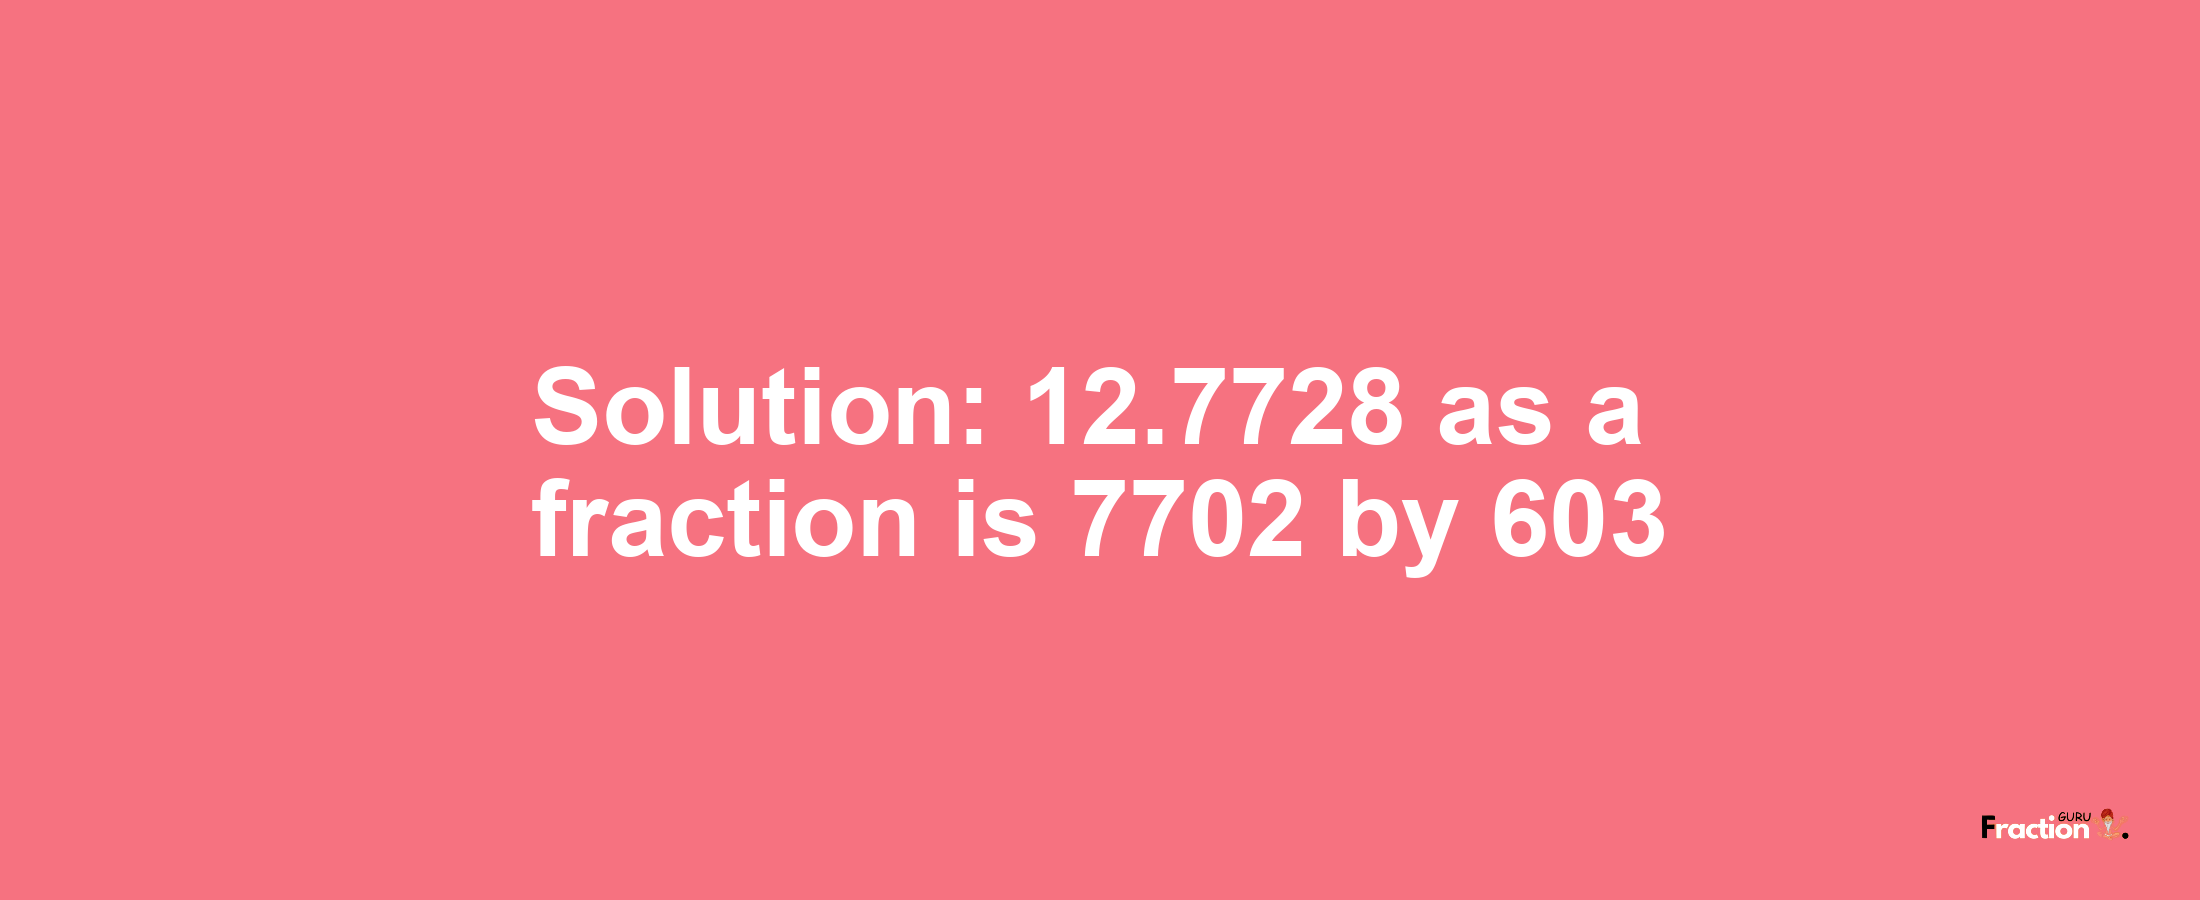 Solution:12.7728 as a fraction is 7702/603